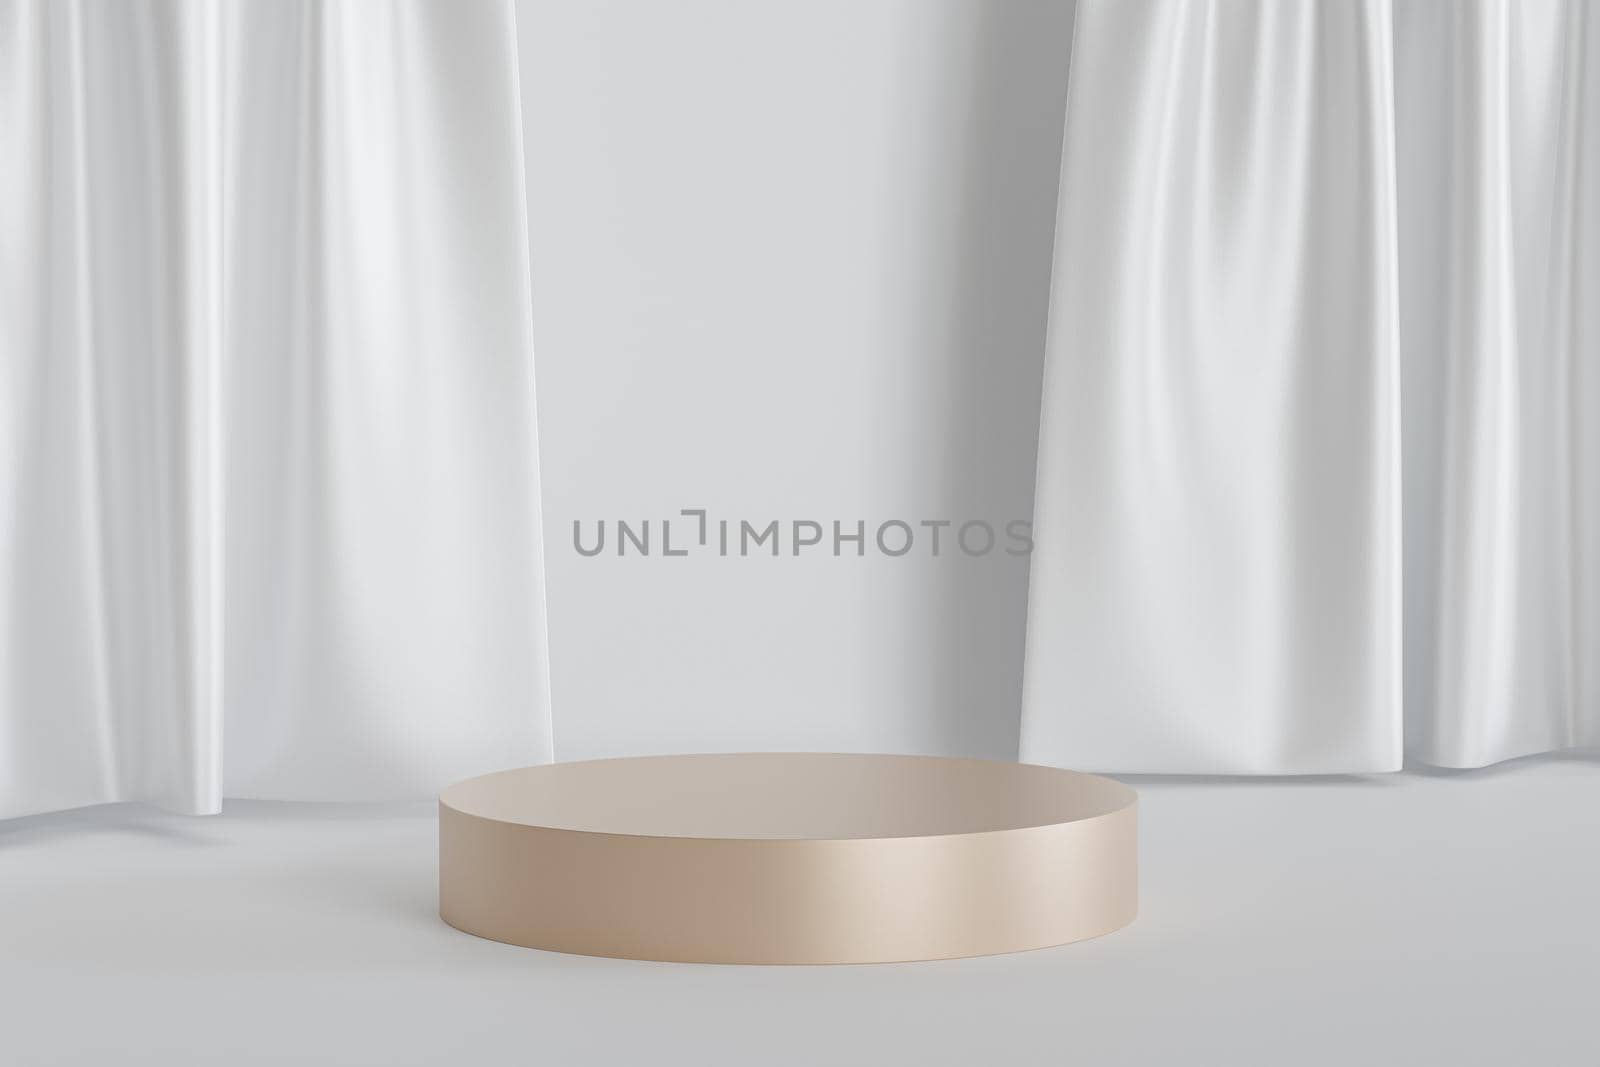 Cylinder shaped podium or pedestal for products or advertising on shiny white curtains background, minimal 3d illustration render